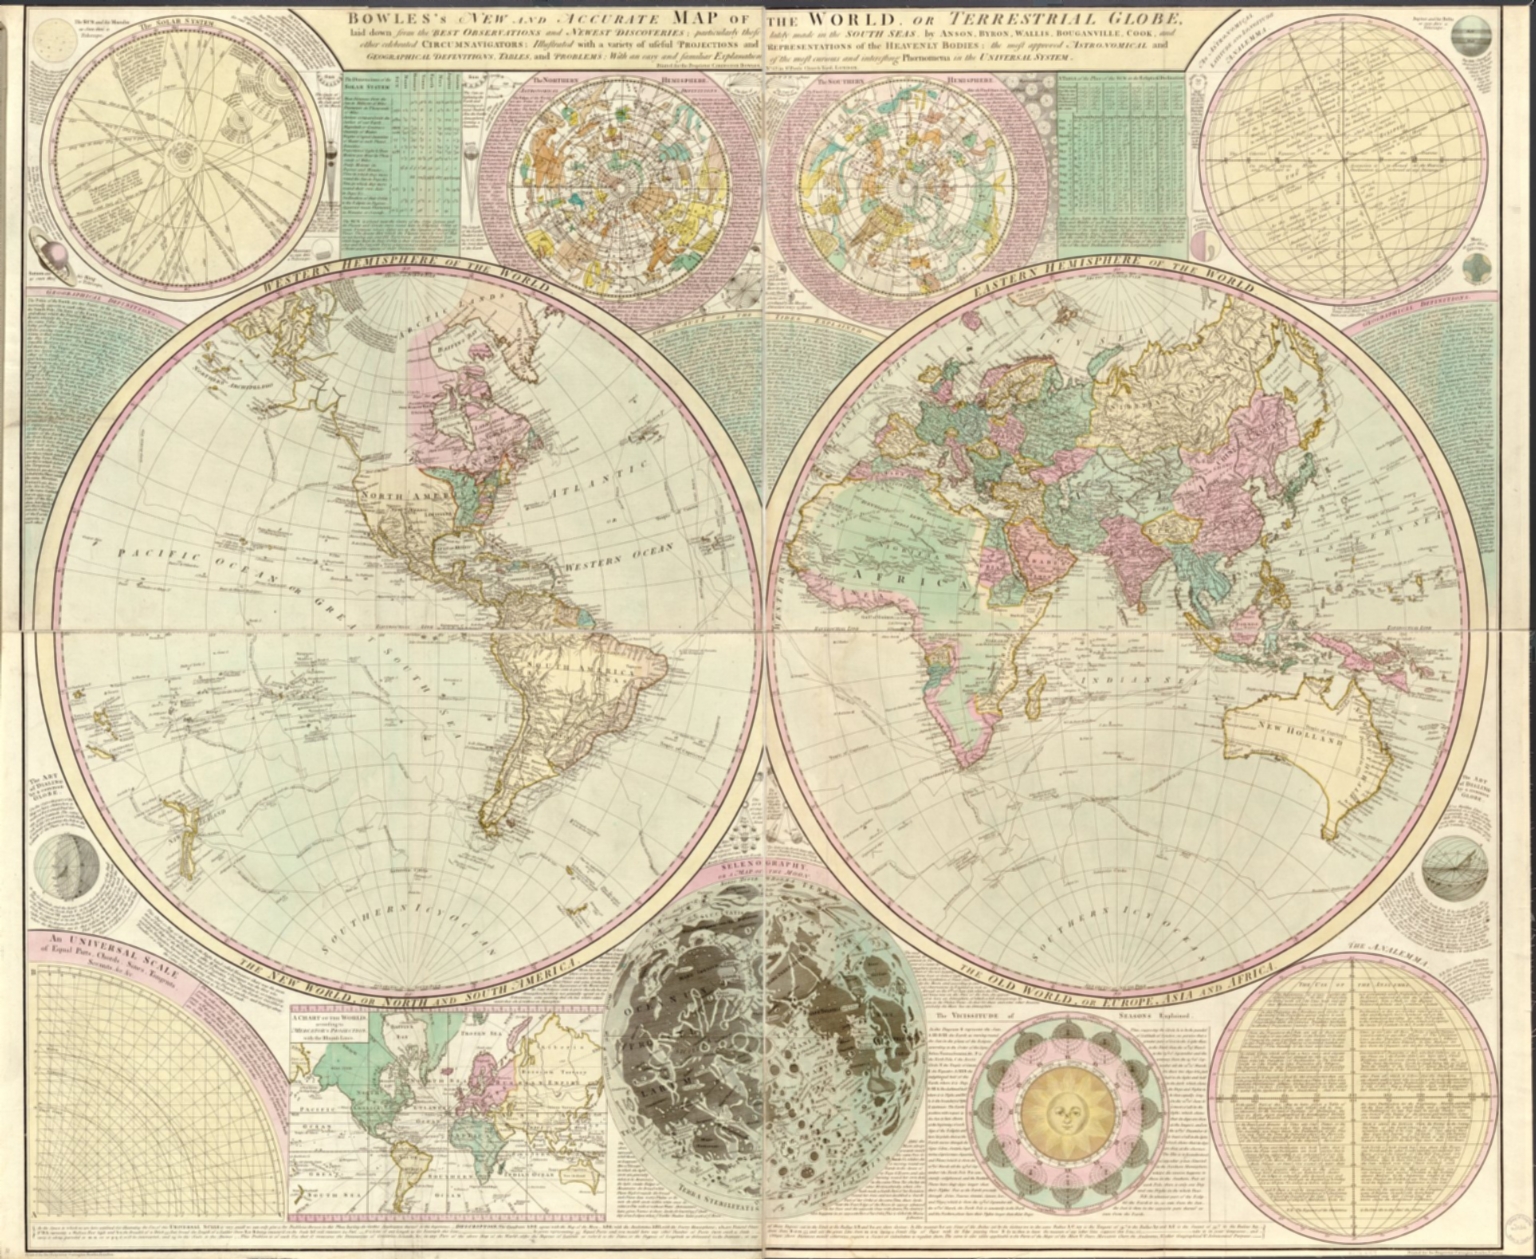 Bowles's new and accurate map of the world, or Terrestrial globe : laid down from the best observations and newest discoveries particularly those lately made in the south seas by Anson, Byron, Wallis, Bouganville, Cook, and other celebrated circumnavigators, illustrated with a variety of useful projections and representations of the heavenly bodies the most approved astronomical and geographical definitions tables, and problems with an easy and familiar explanation of the most curious and interesting phoenomena in the universal system